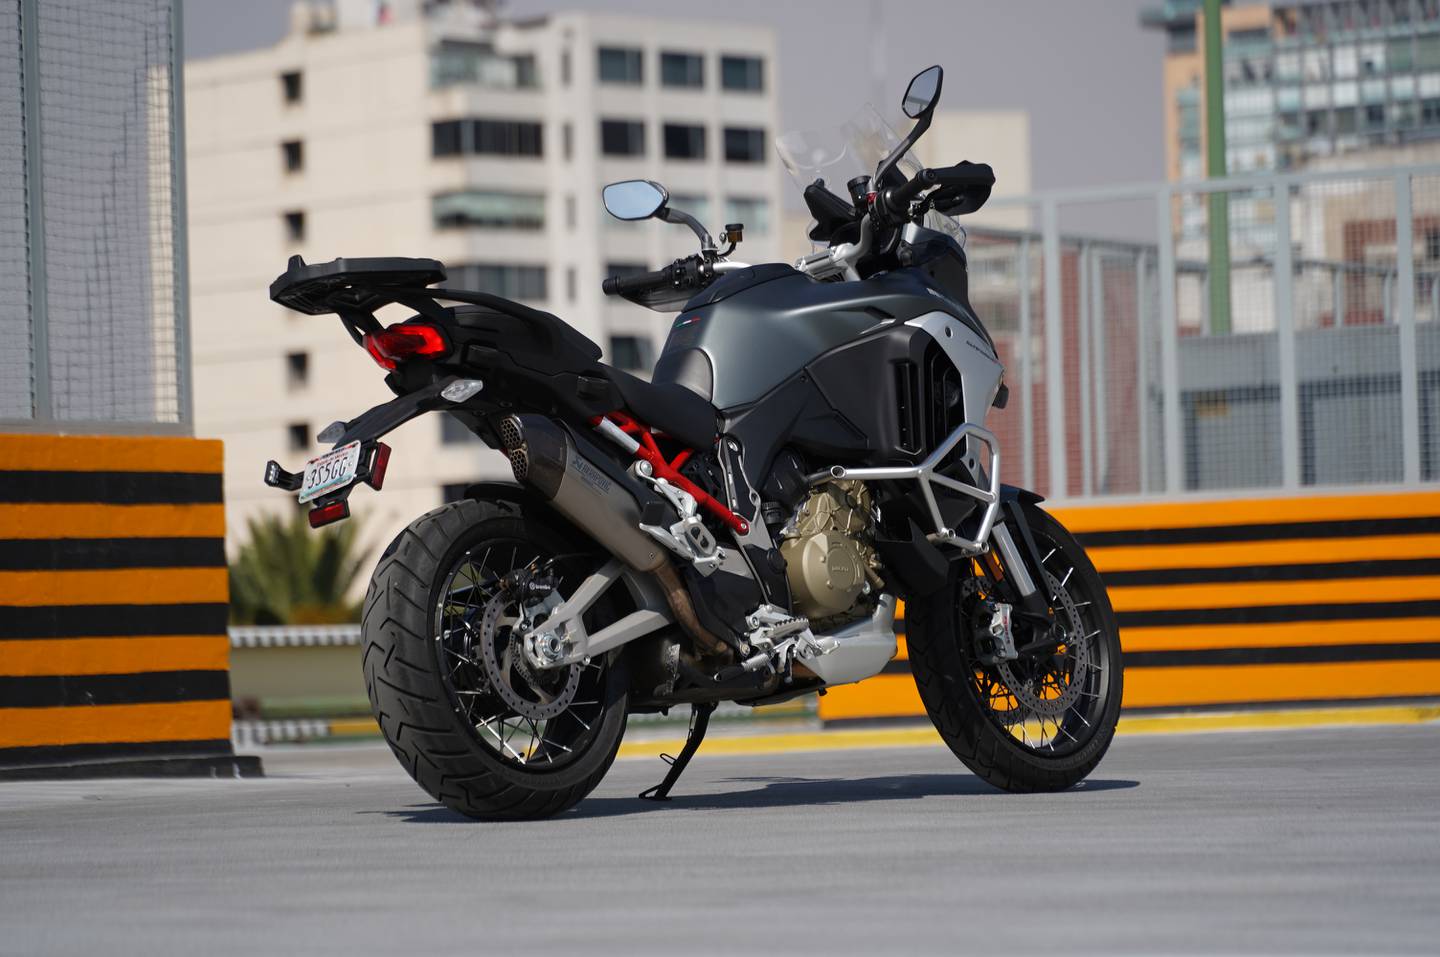 Do you like motorbikes but are you afraid? This is one of the most advanced safety motorcycles in Mexico